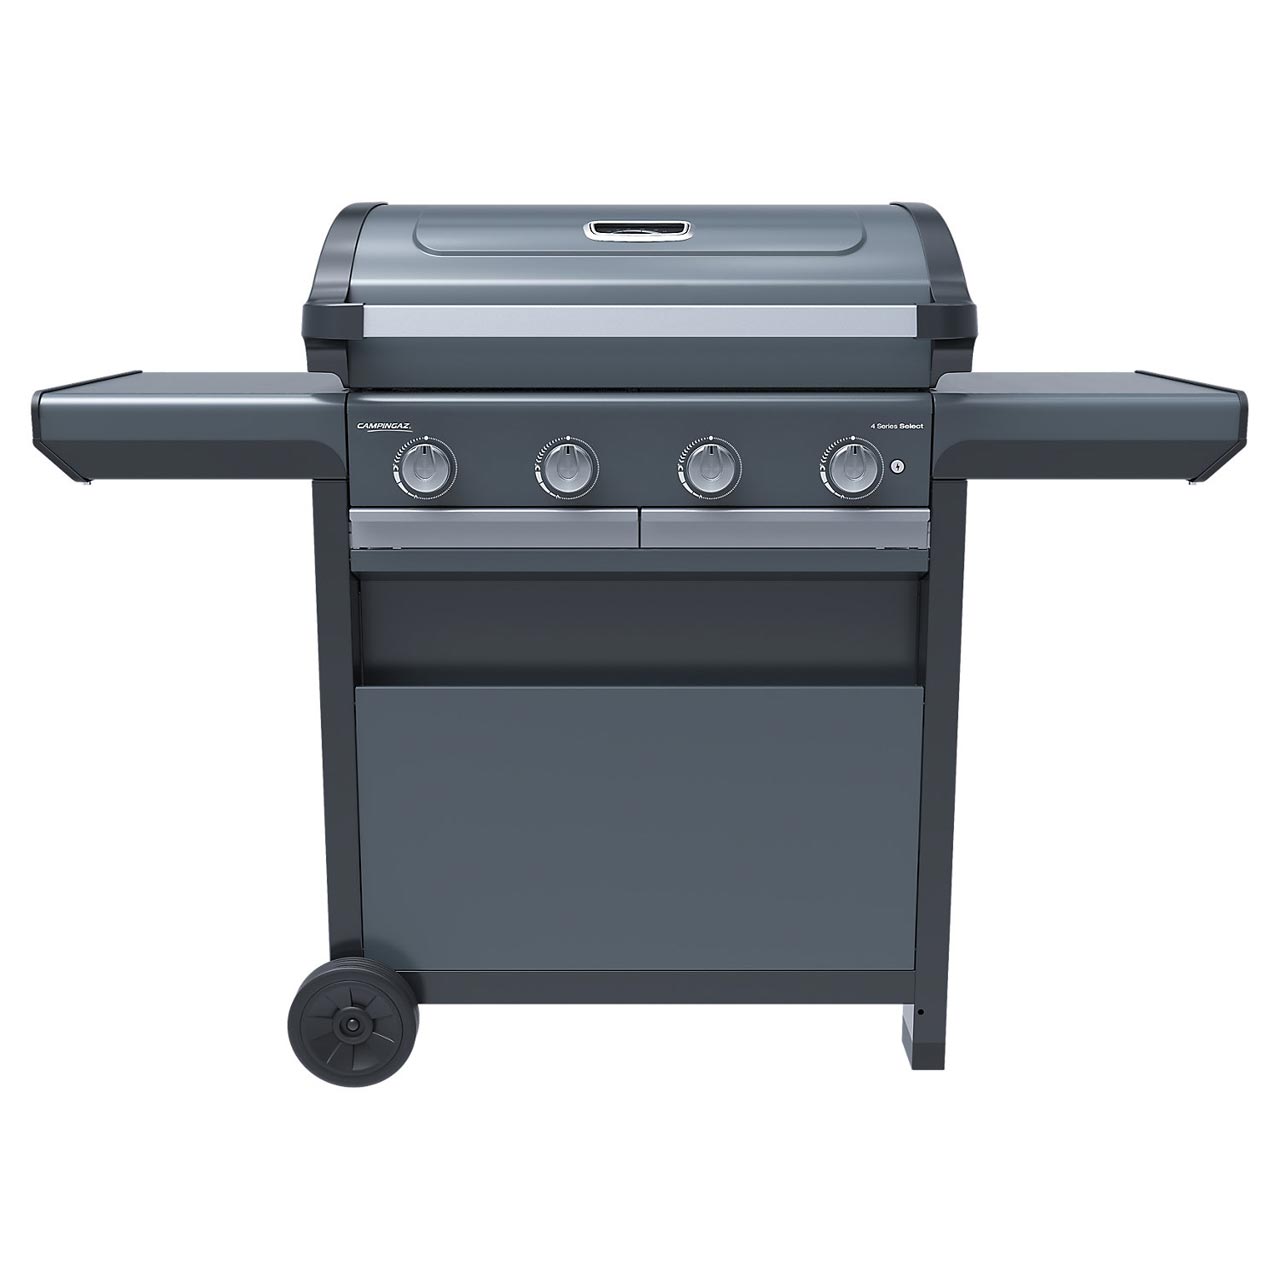 Campingaz BBQ 4 Series Select 37485, Gasgrill, mit emaillierte Gusseisenroste